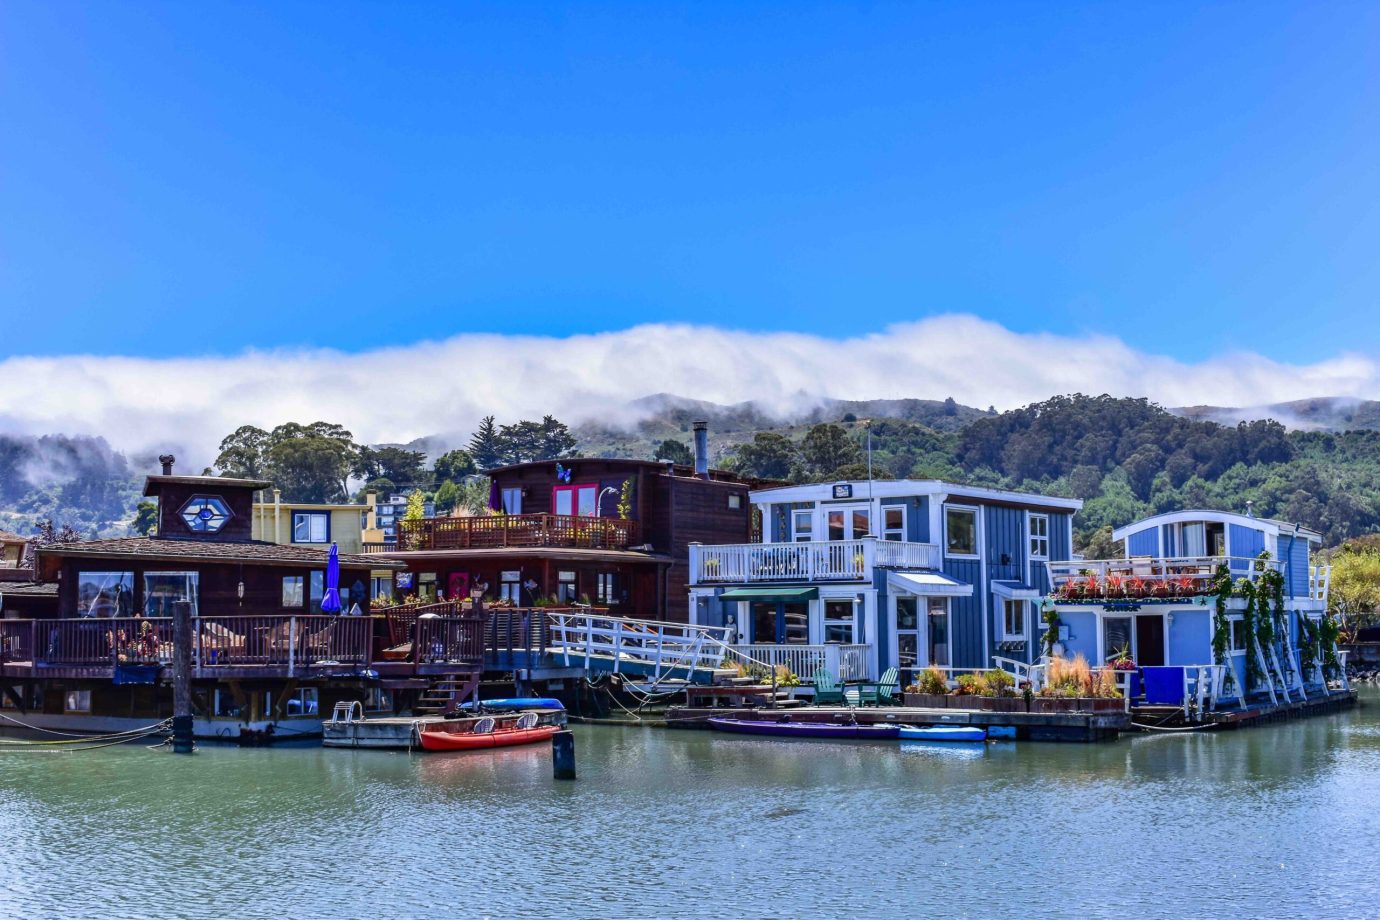 Colorful houseboats floating in Sausalito near San Francisco